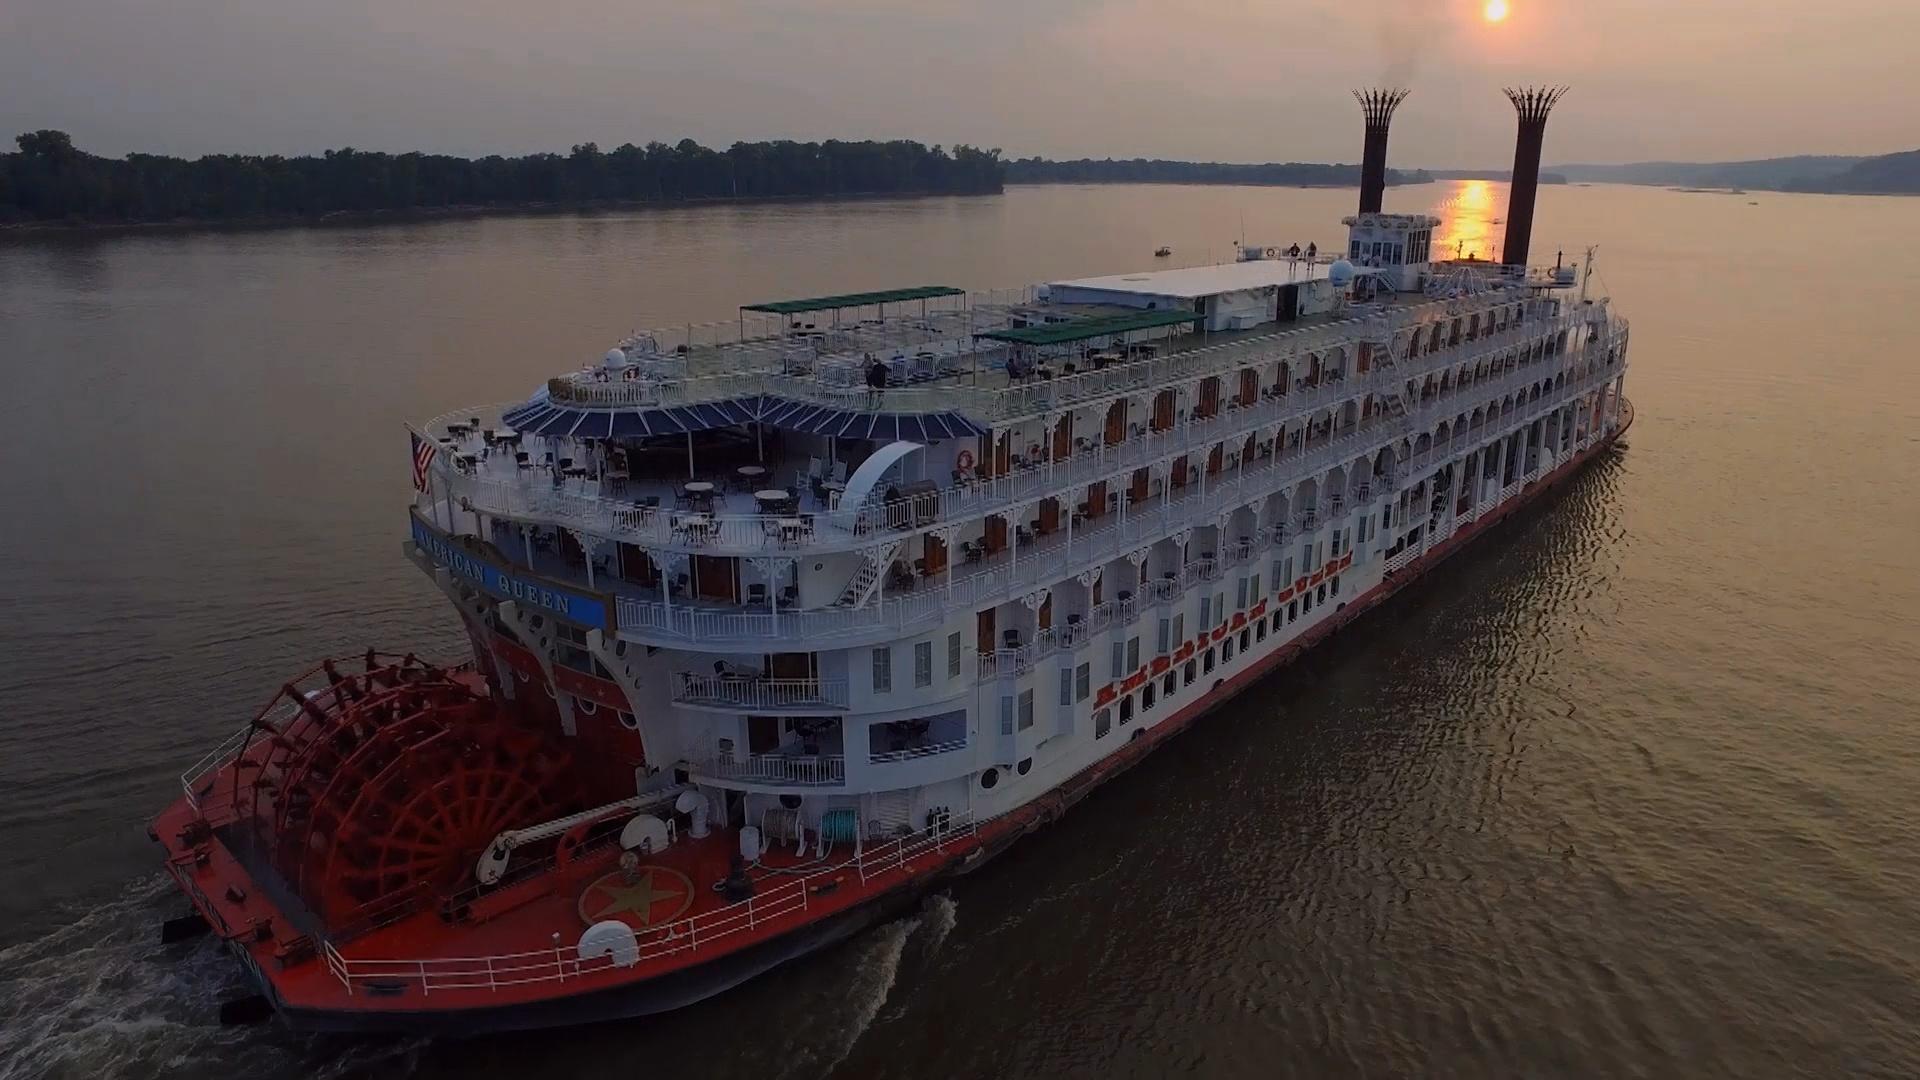 The American Queen on the Mississippi at sunset